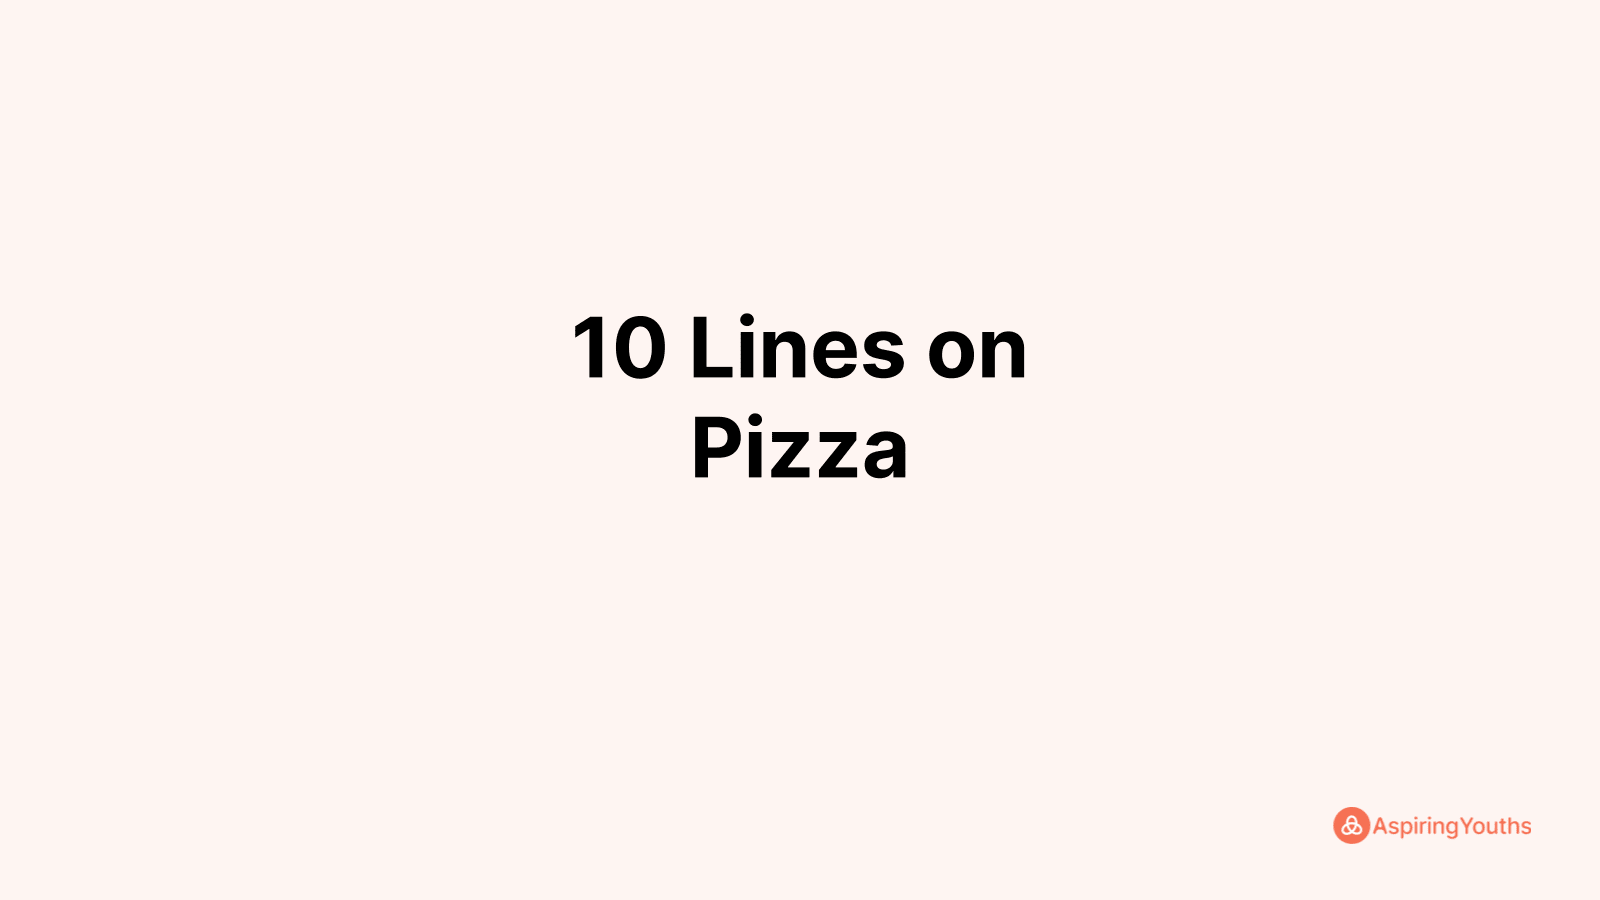 Write 10 Lines on Pizza